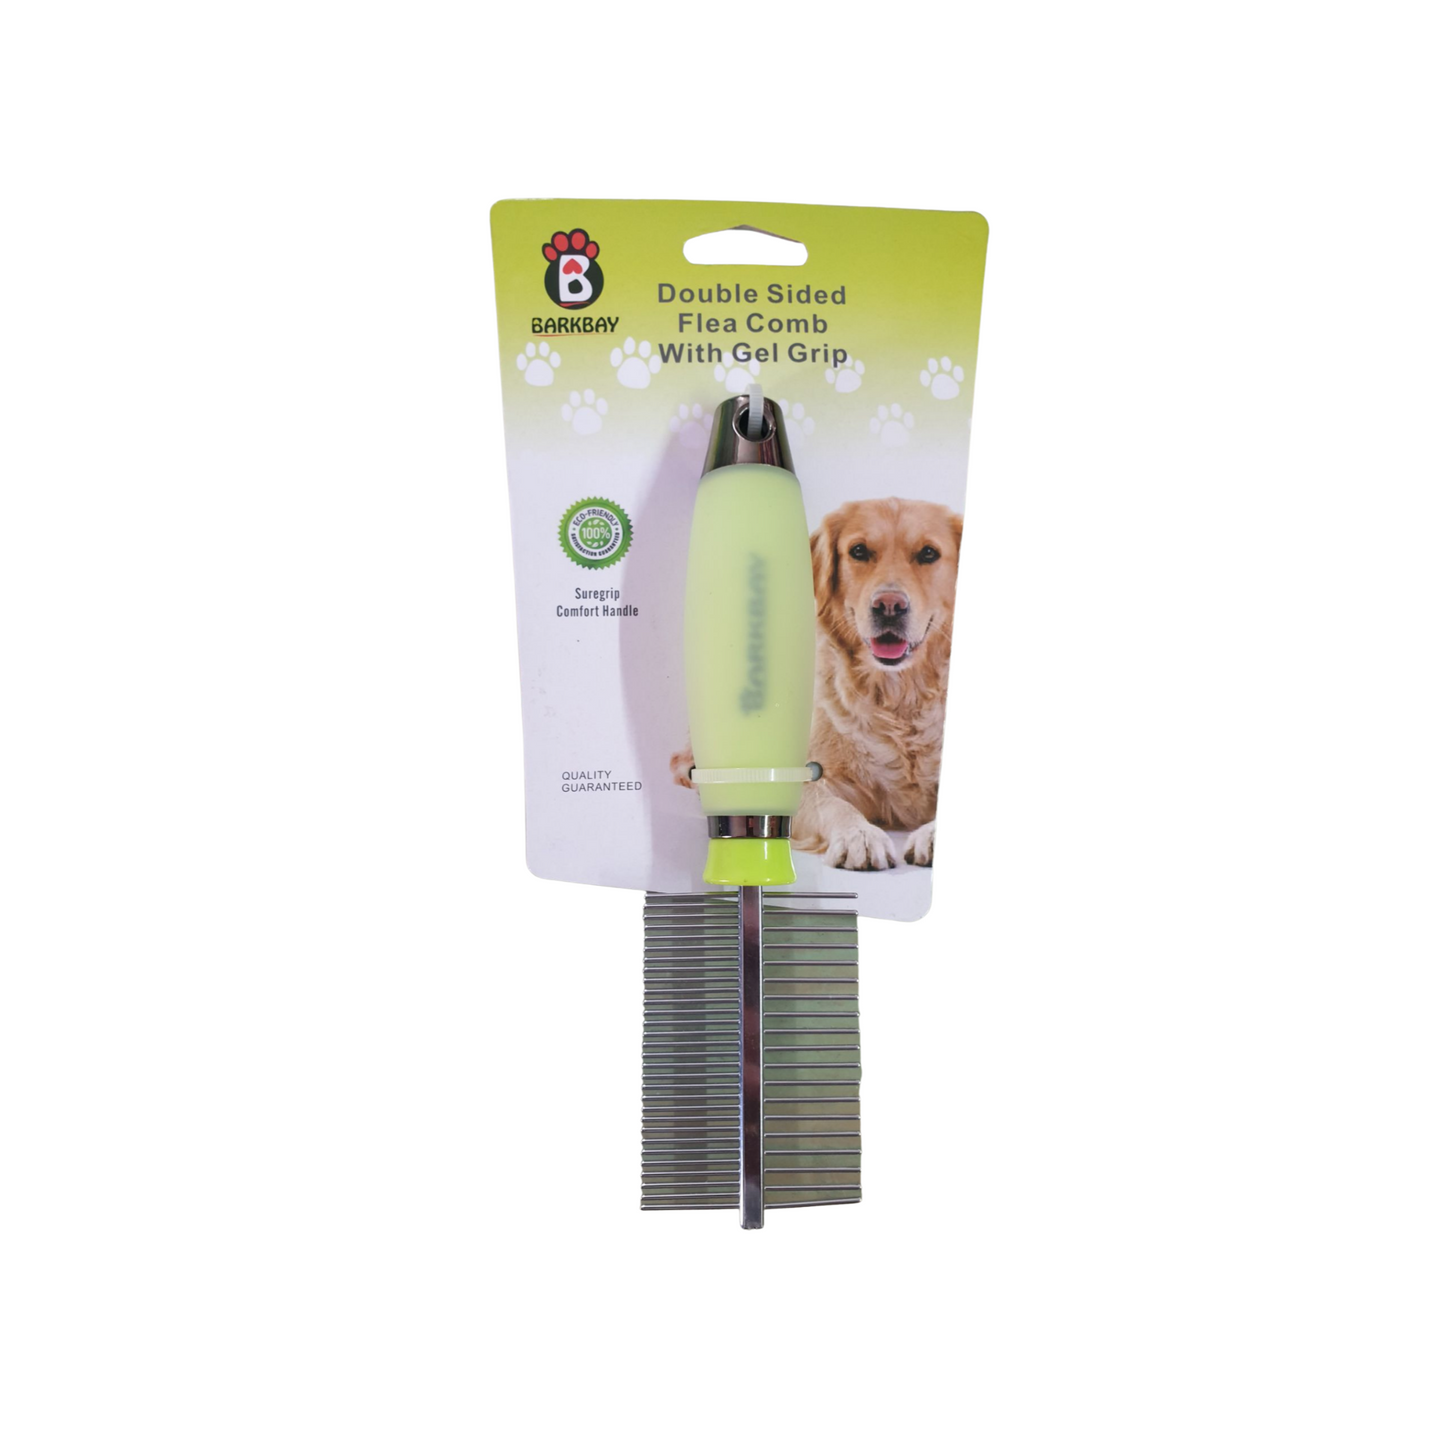 Barkbay double Sided Flea Comb with gel grip